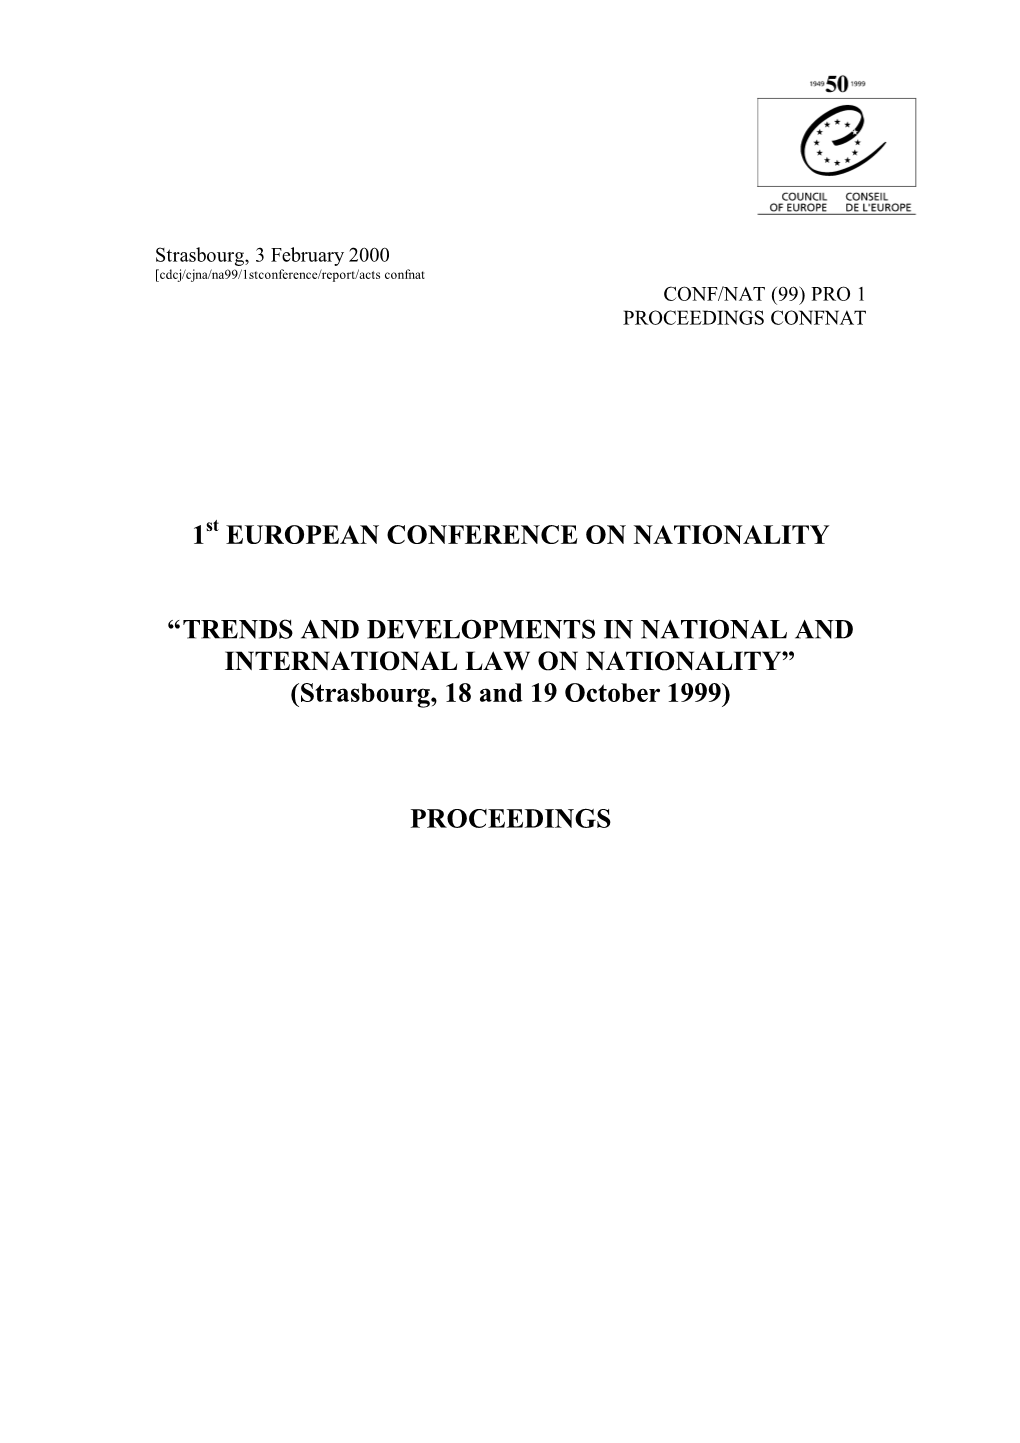 1St European Conference on Nationality, Strasbourg, 18-19 Nove